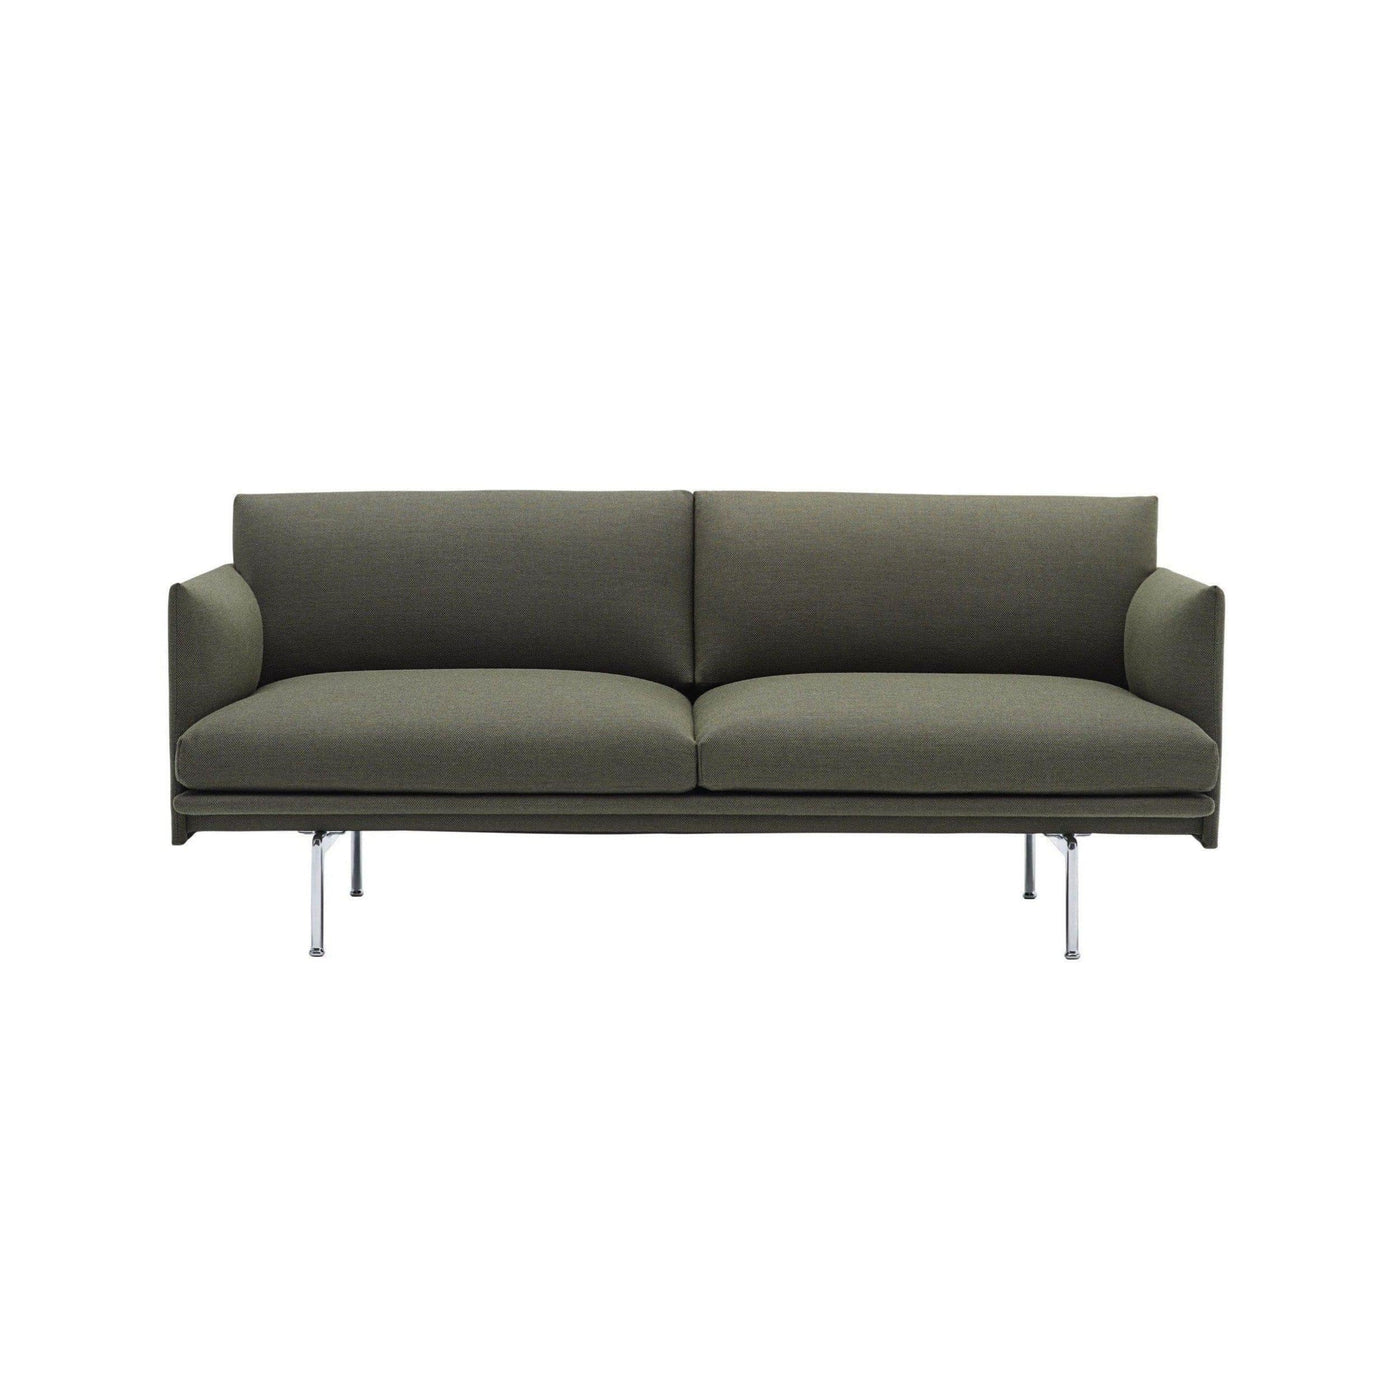 Muuto Outline 2 seater sofa in fiord 961 with polished aluminium legs. Available from someday designs. #colour_fiord-961